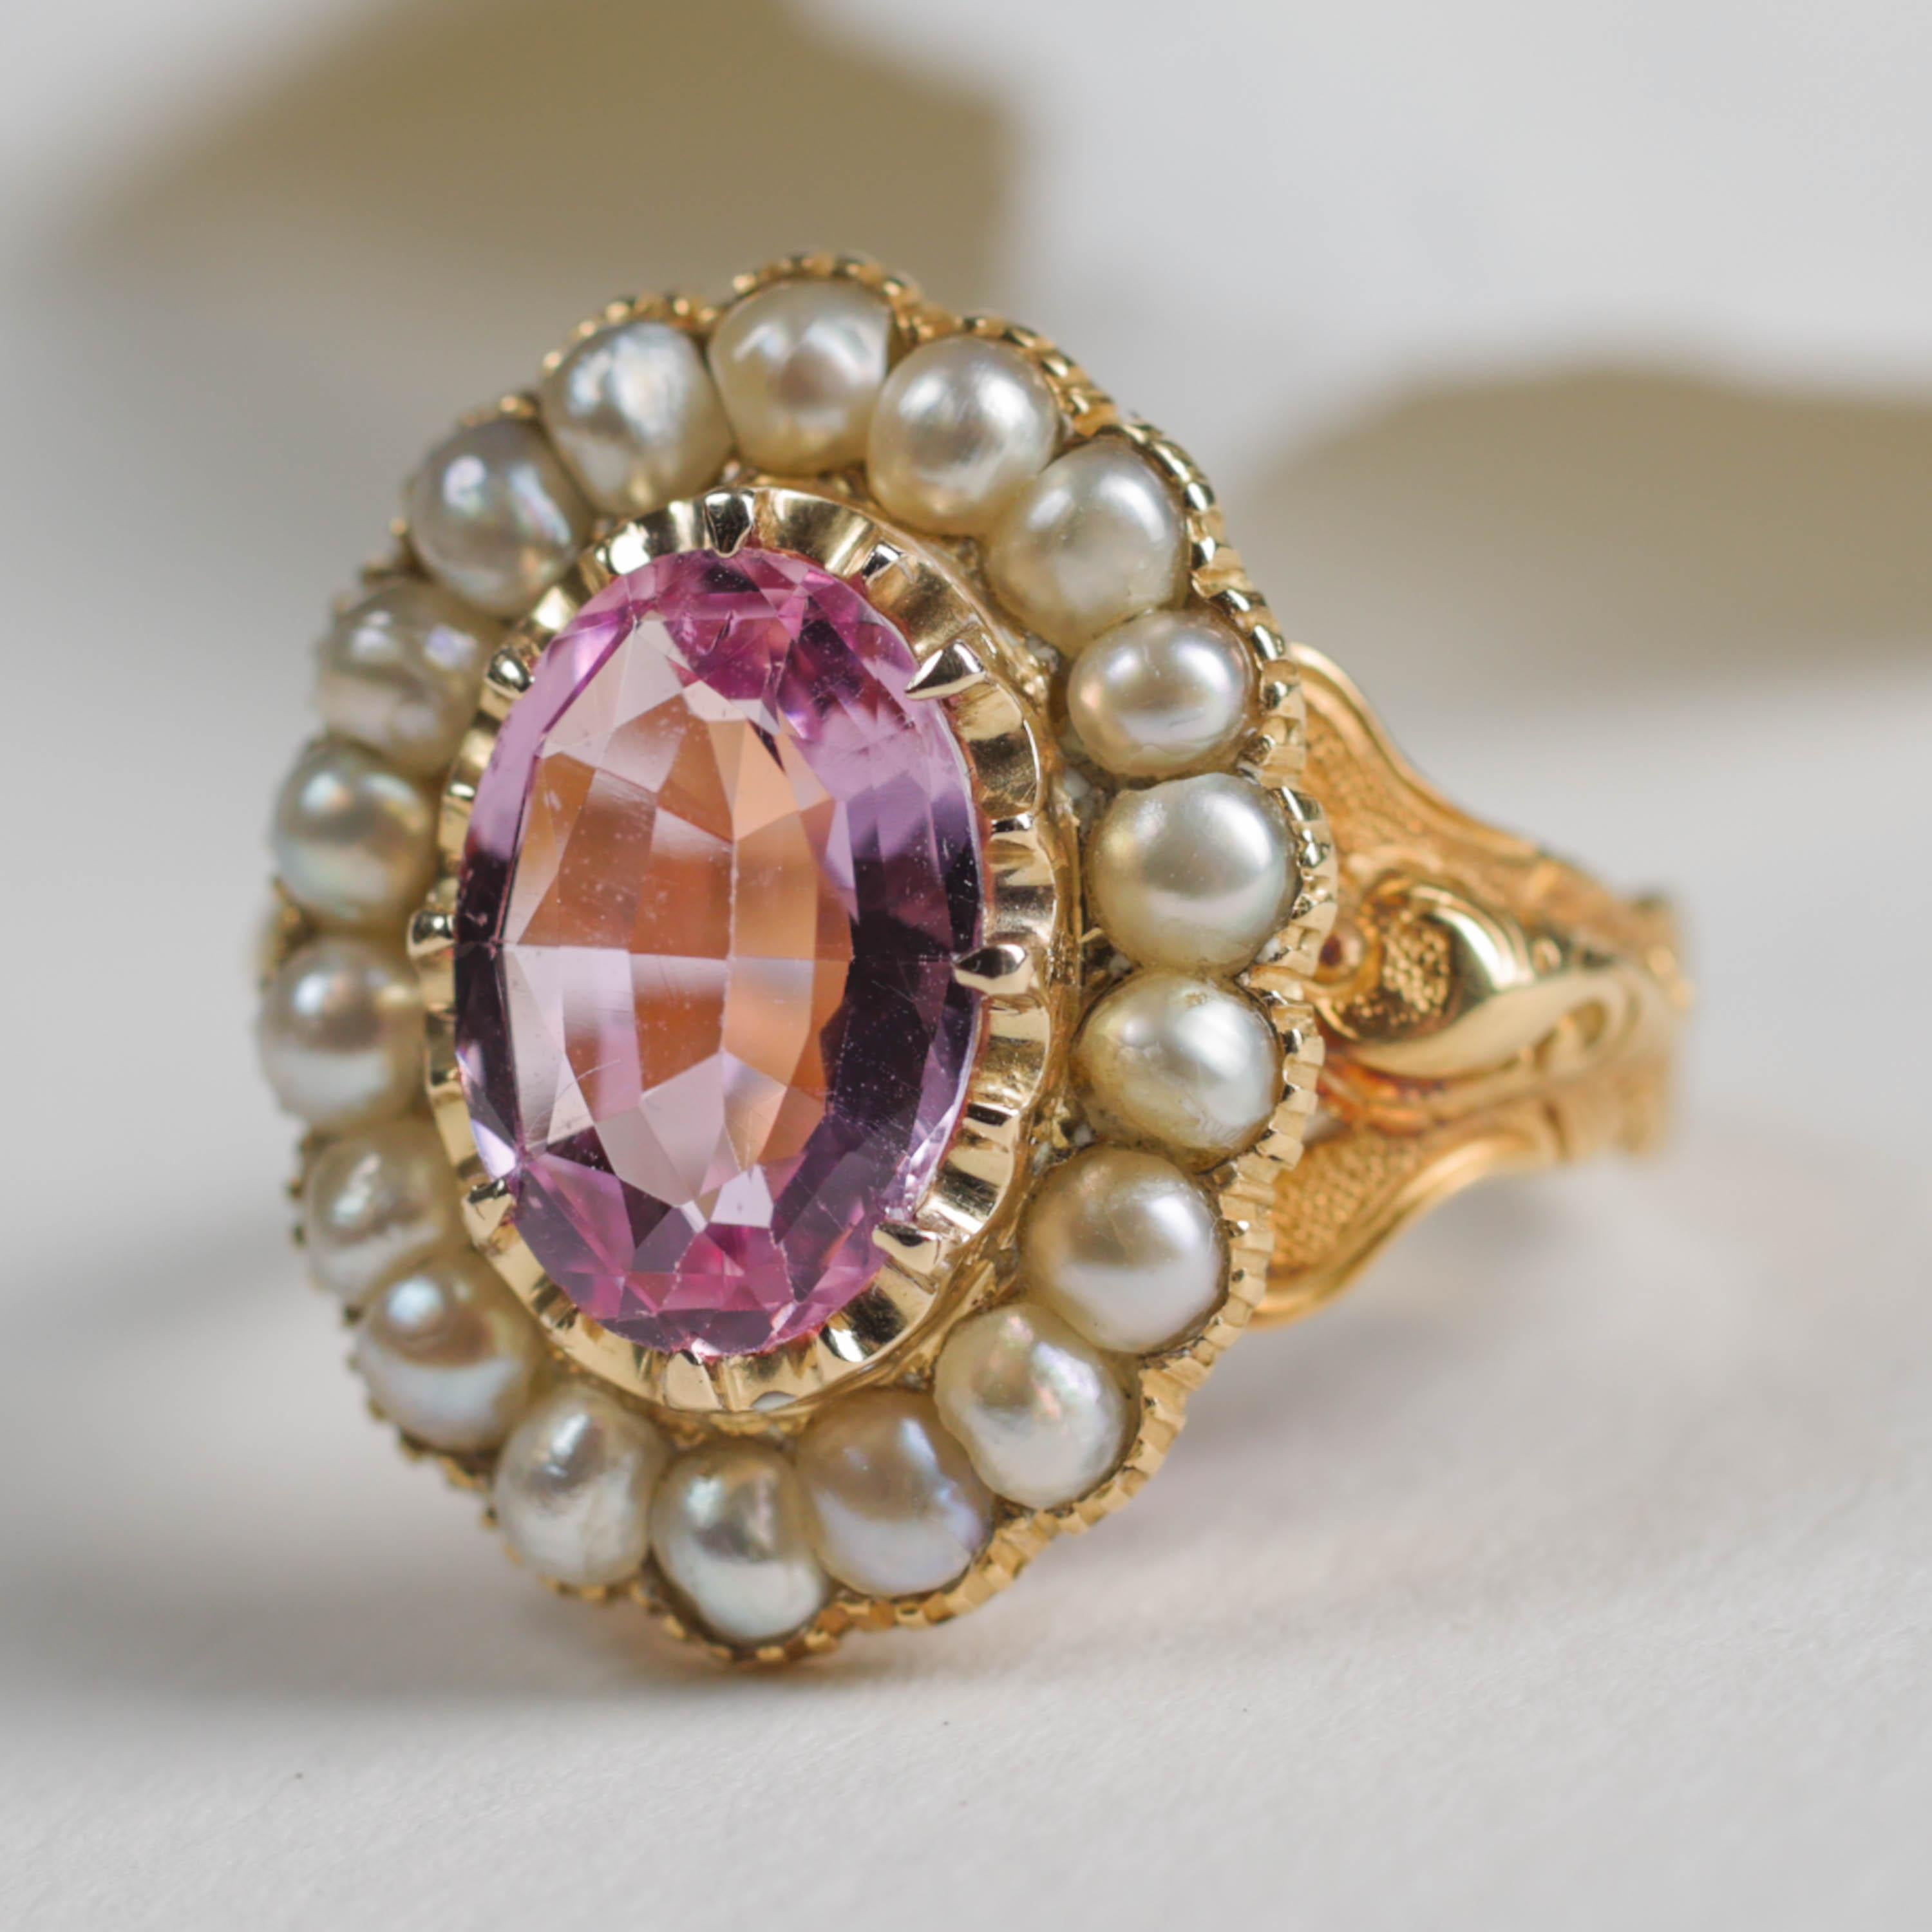 An unapologetically regal natural, untreated pink topaz gemstone is surrounded by a halo of natural uncultured saltwater pearls in this magnificently rare and beautiful unisex ring from the second half of the 19th century. 

Dating to 1843 and made